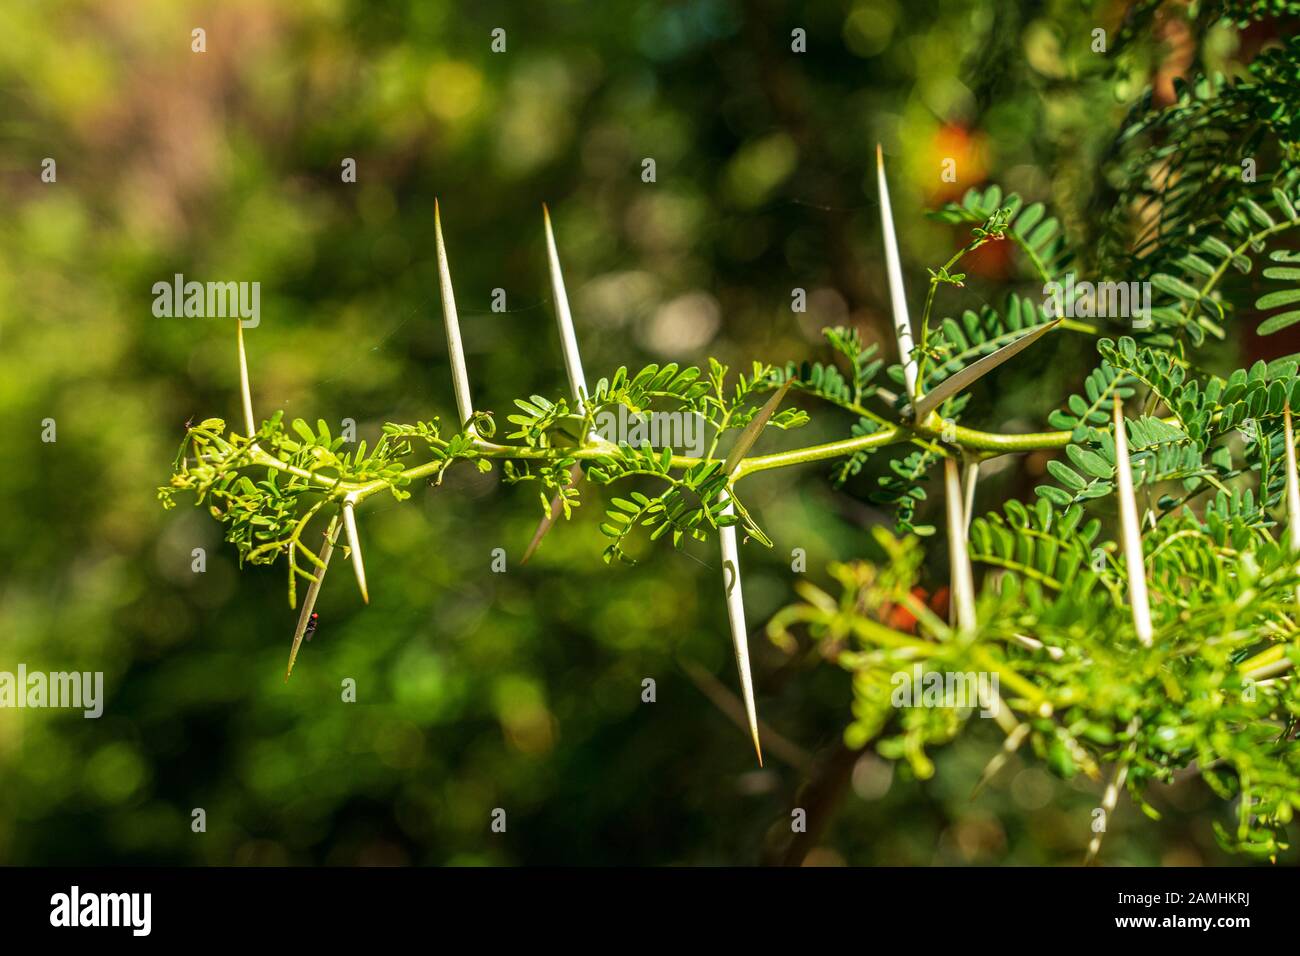 Close up of large spines on Robinia pseudoacacia or Black Locust Tree in garden with bokeh background Stock Photo